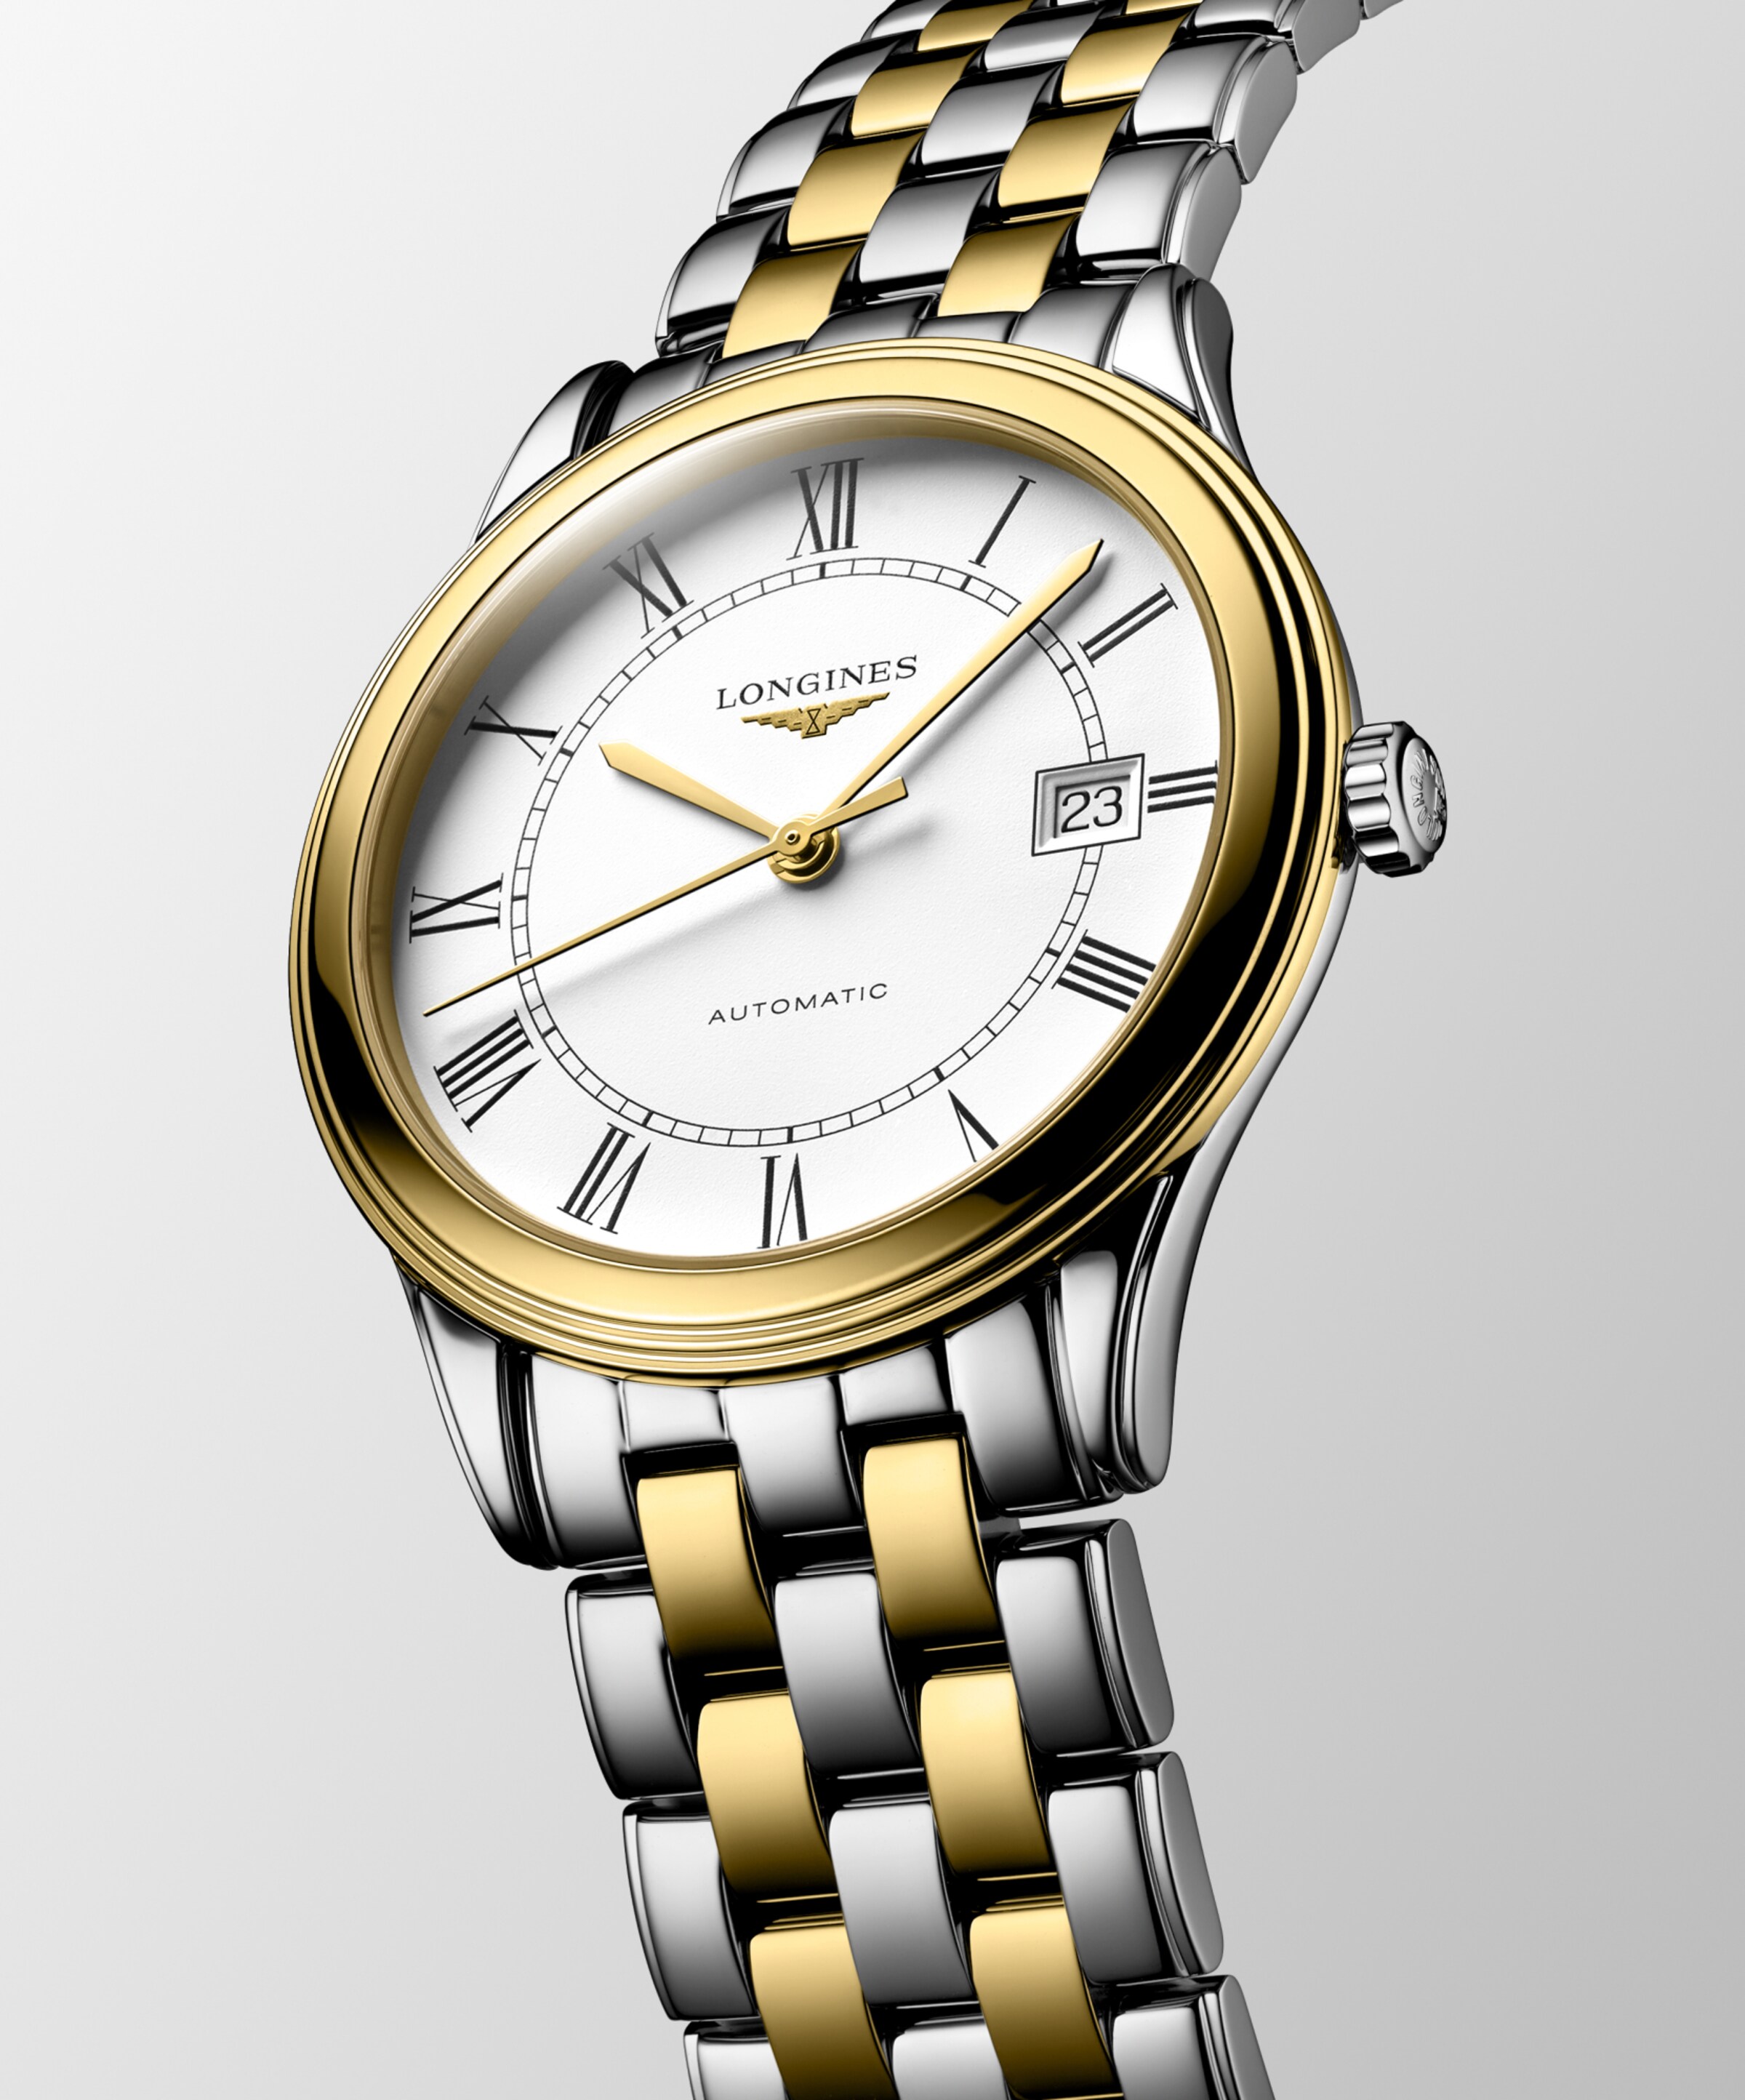 Longines FLAGSHIP Automatic Stainless steel and yellow PVD coating Watch - L4.974.3.21.7